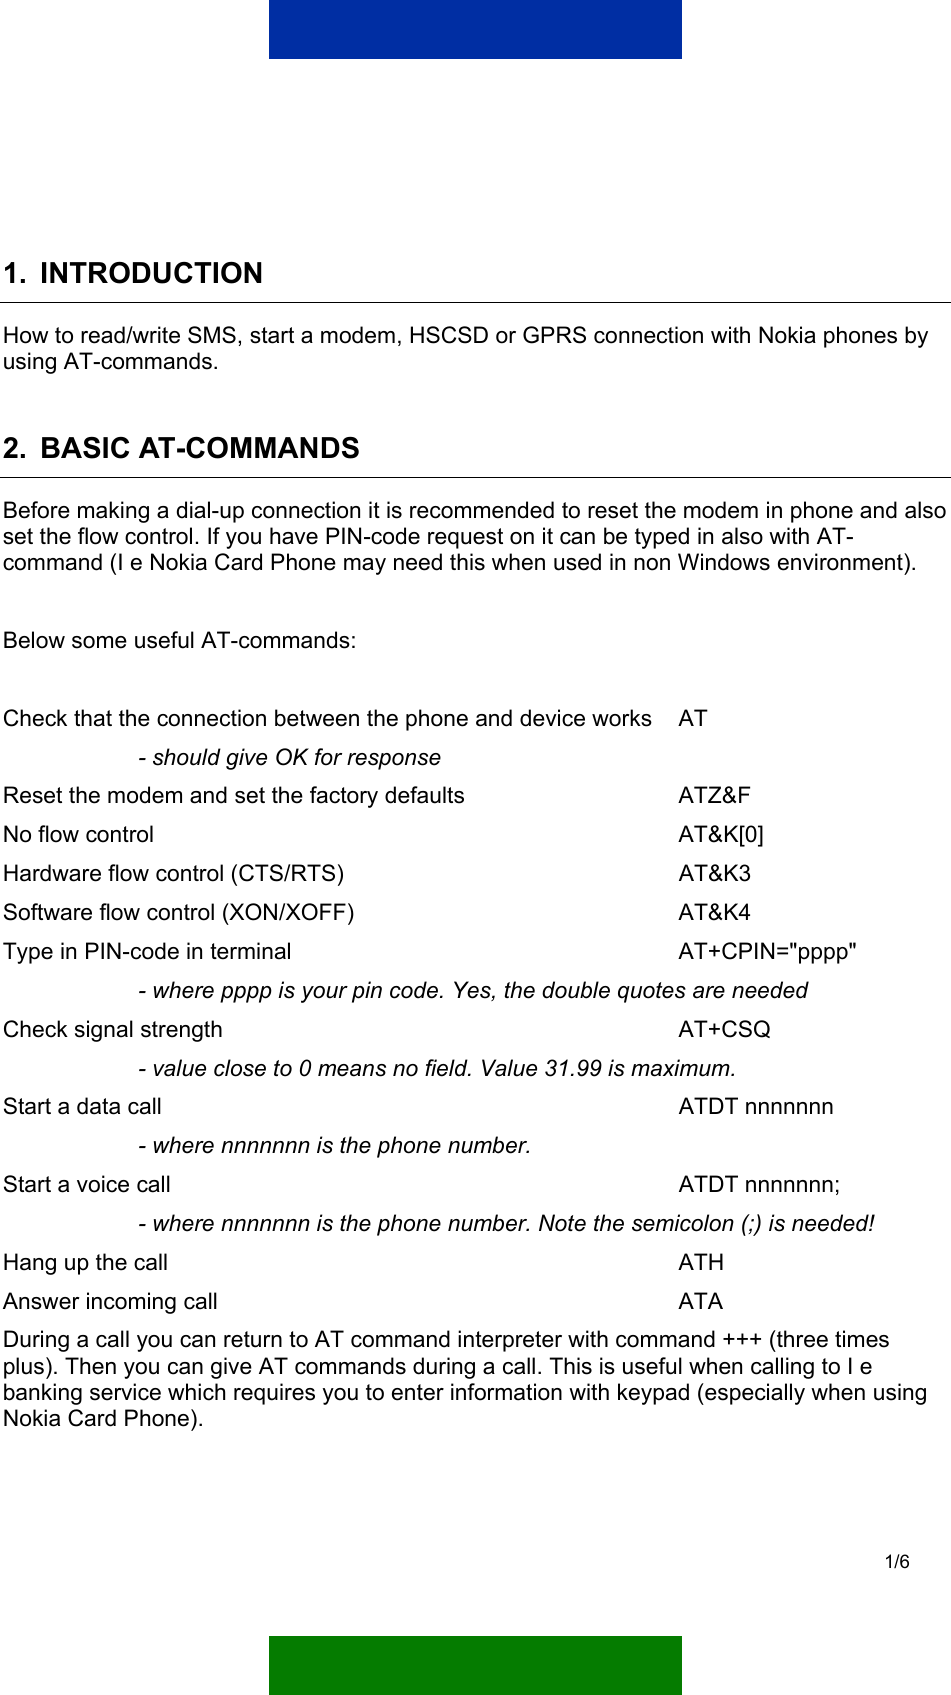 Page 3 of 8 - Alvarez NA Support Guide For The Nokia Phones And AT Commands  To Manual 0a6b6aae-c9a5-481b-abcc-b4781d91f446